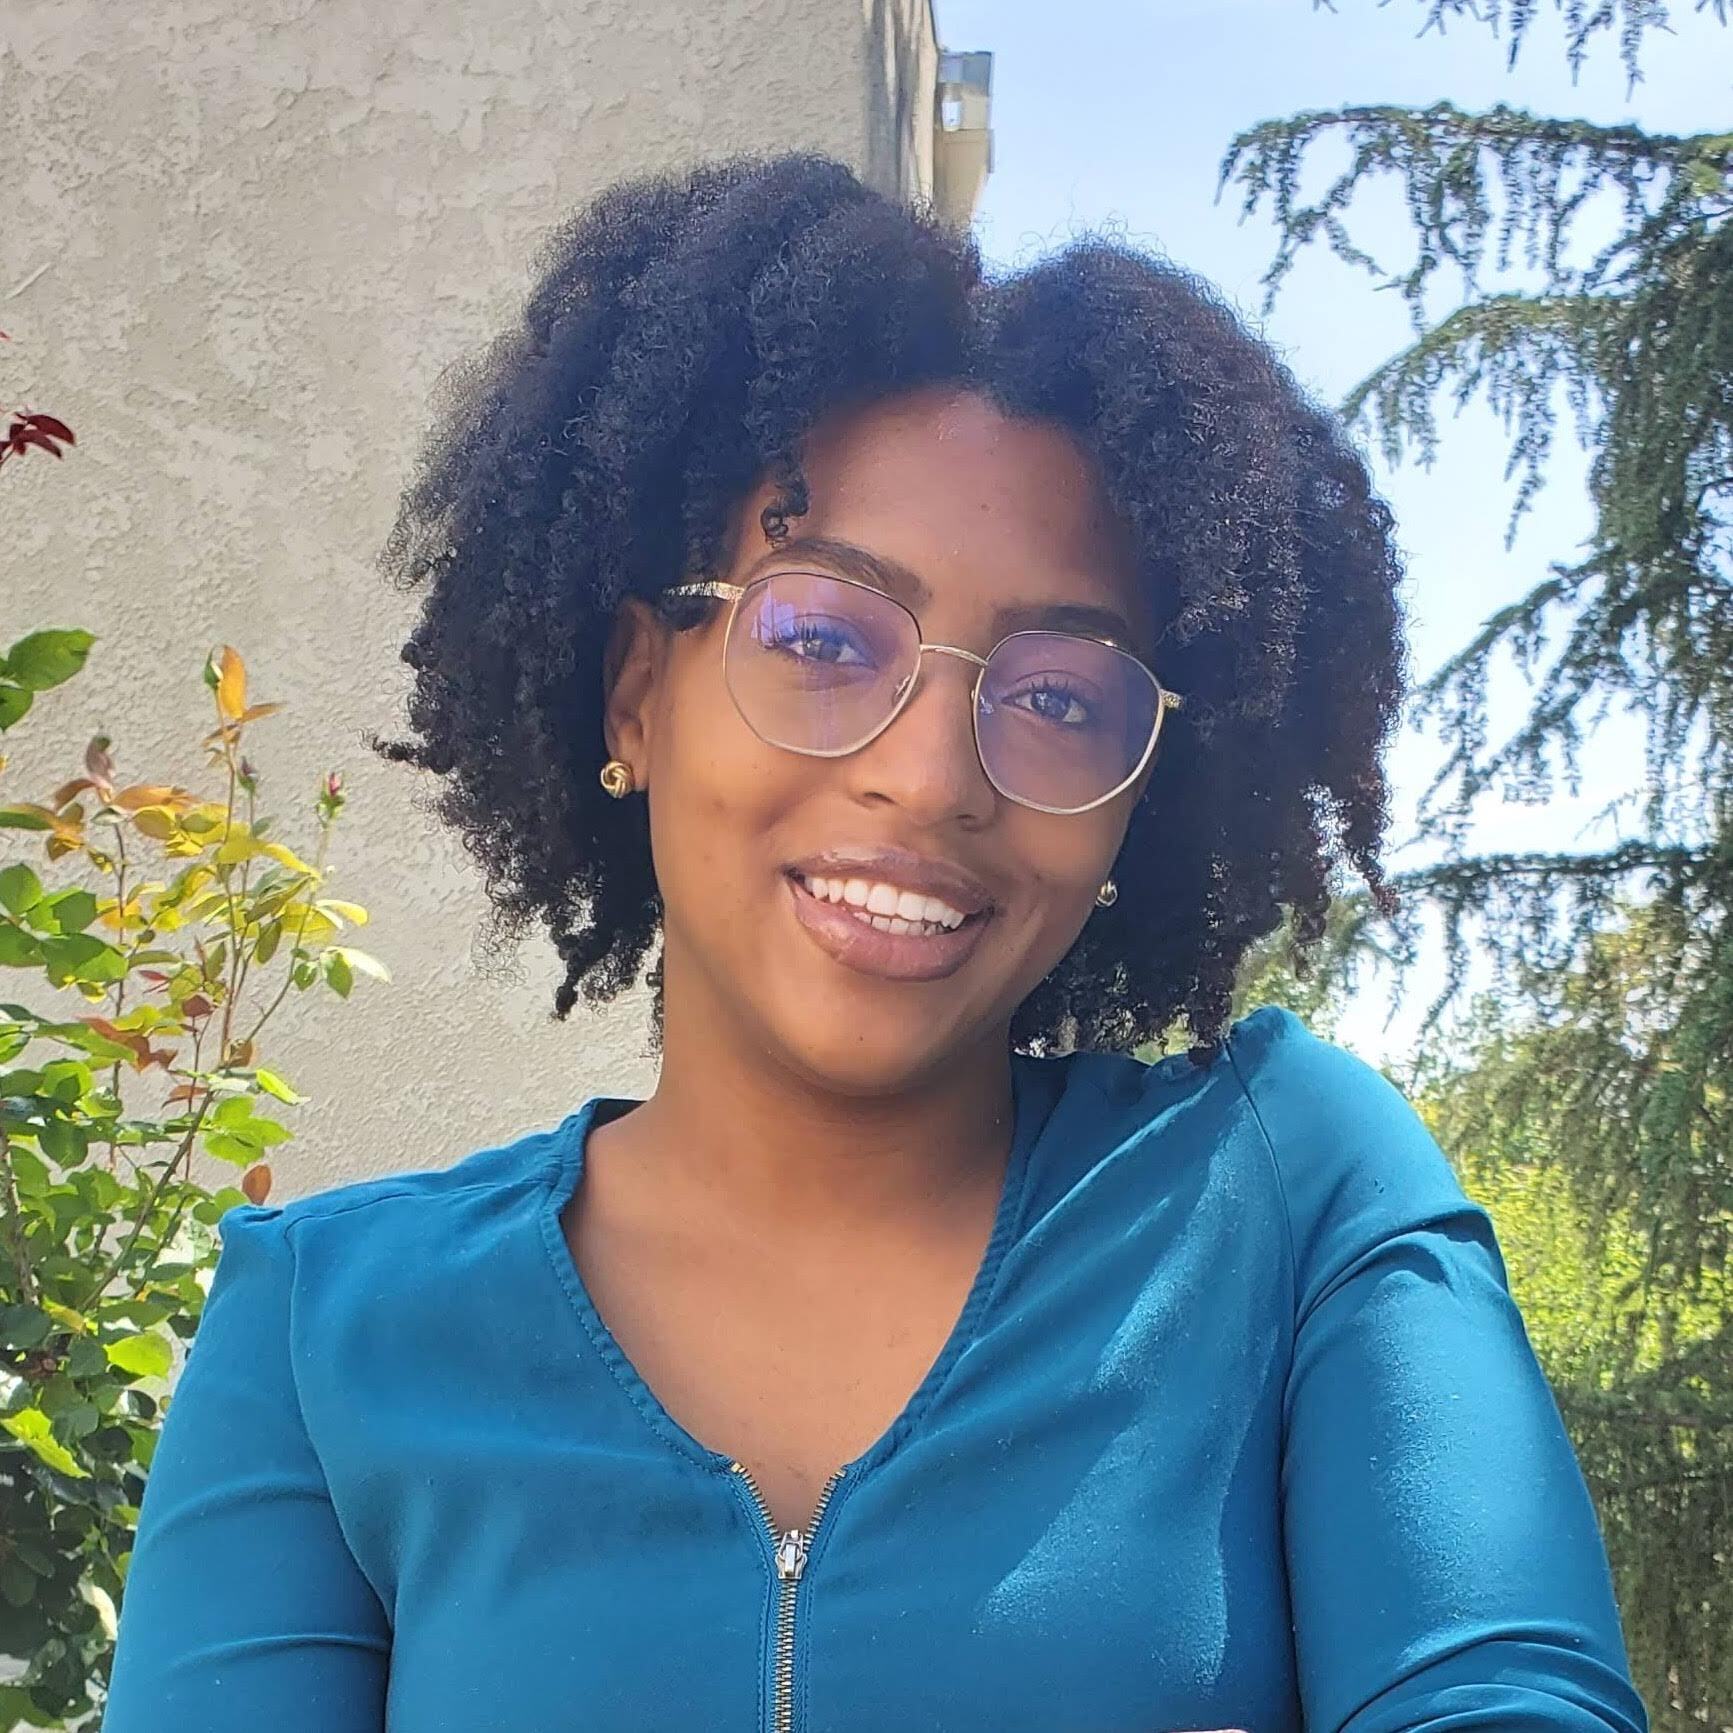 Jameela Bahar2020 Alumna matched at Techstars LACurrent role: Program Manager at HBCUvc